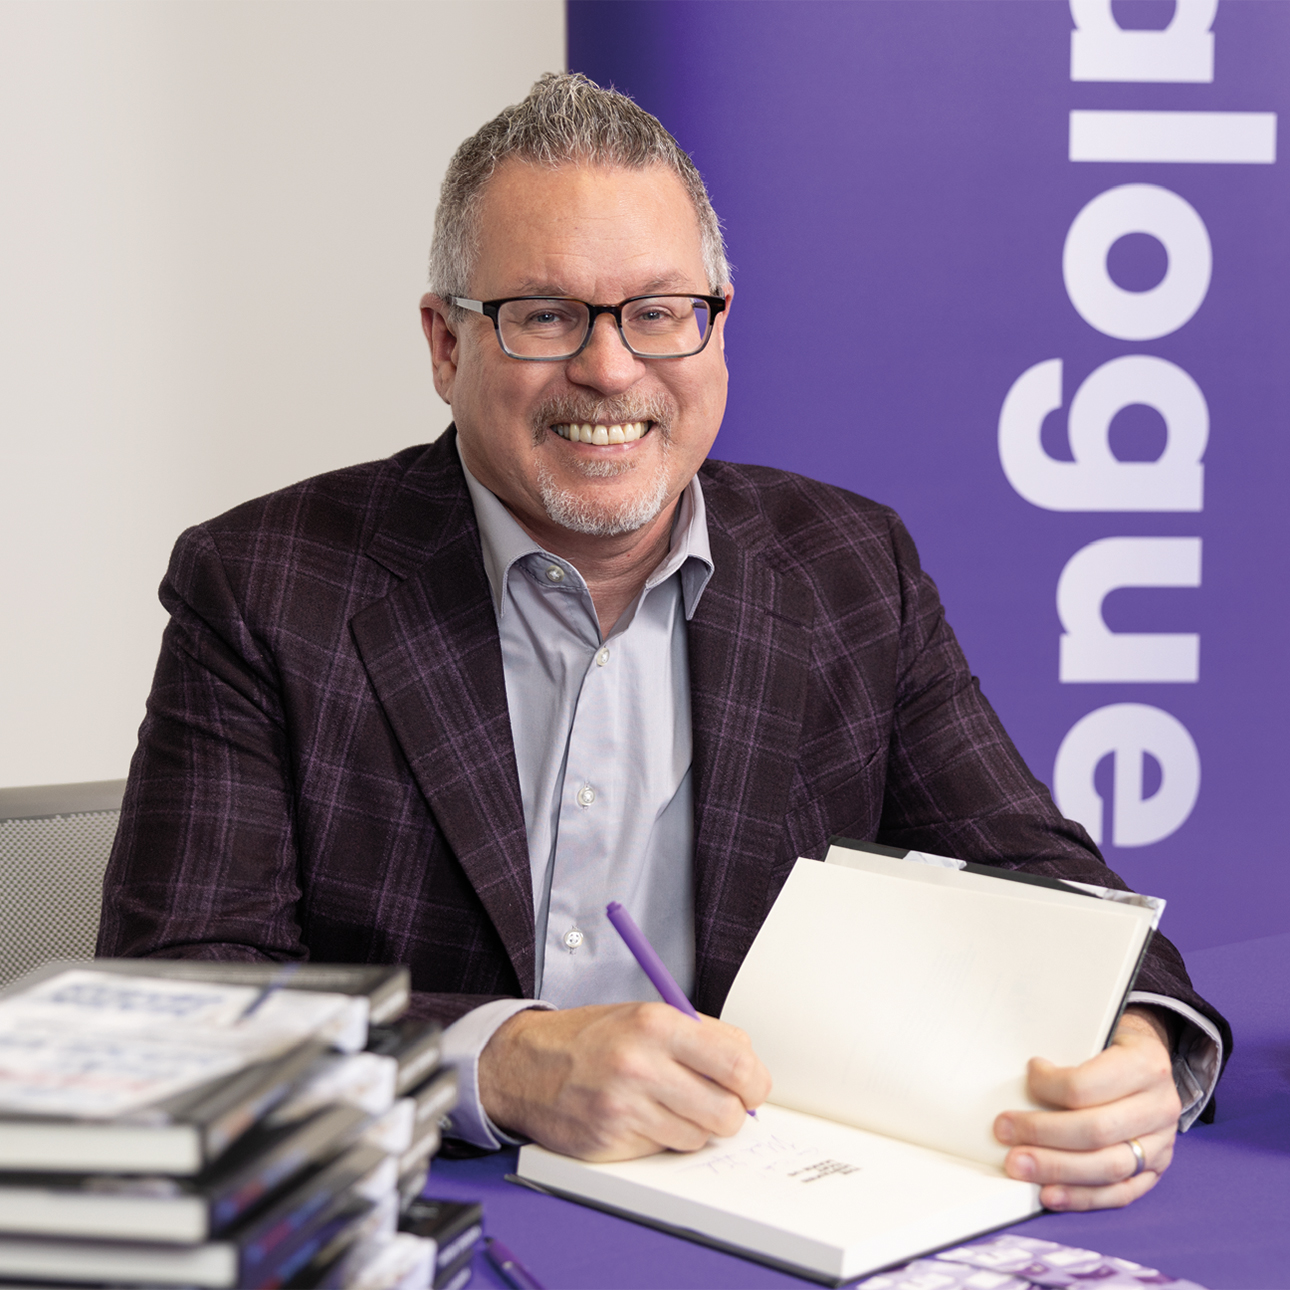 A man wearing glasses and a suit smiles while signing a book.